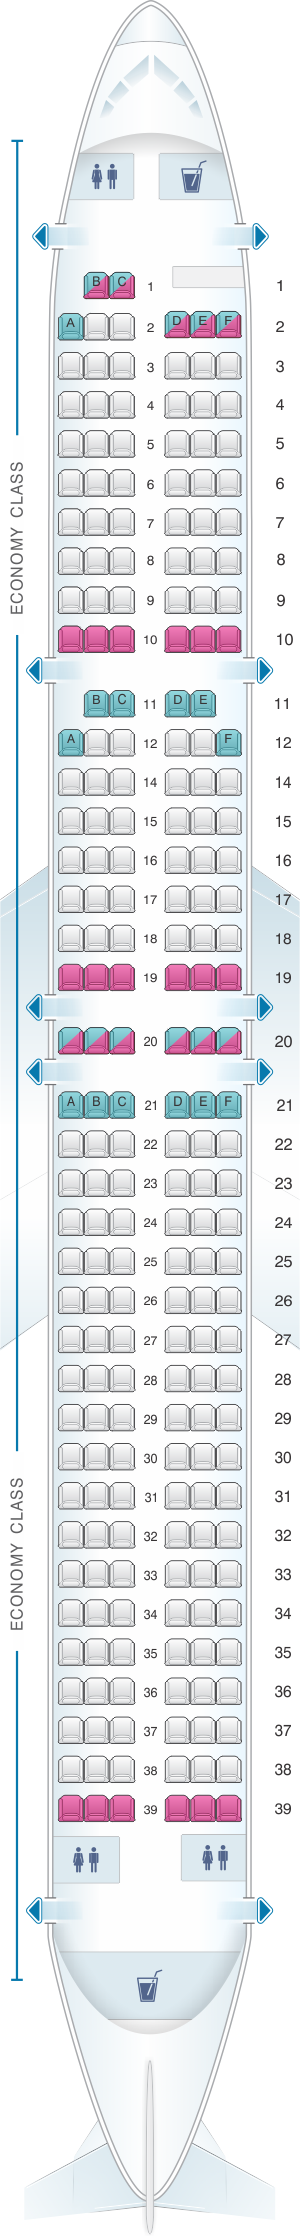 Seat map for VIM Airlines Boeing B757 200